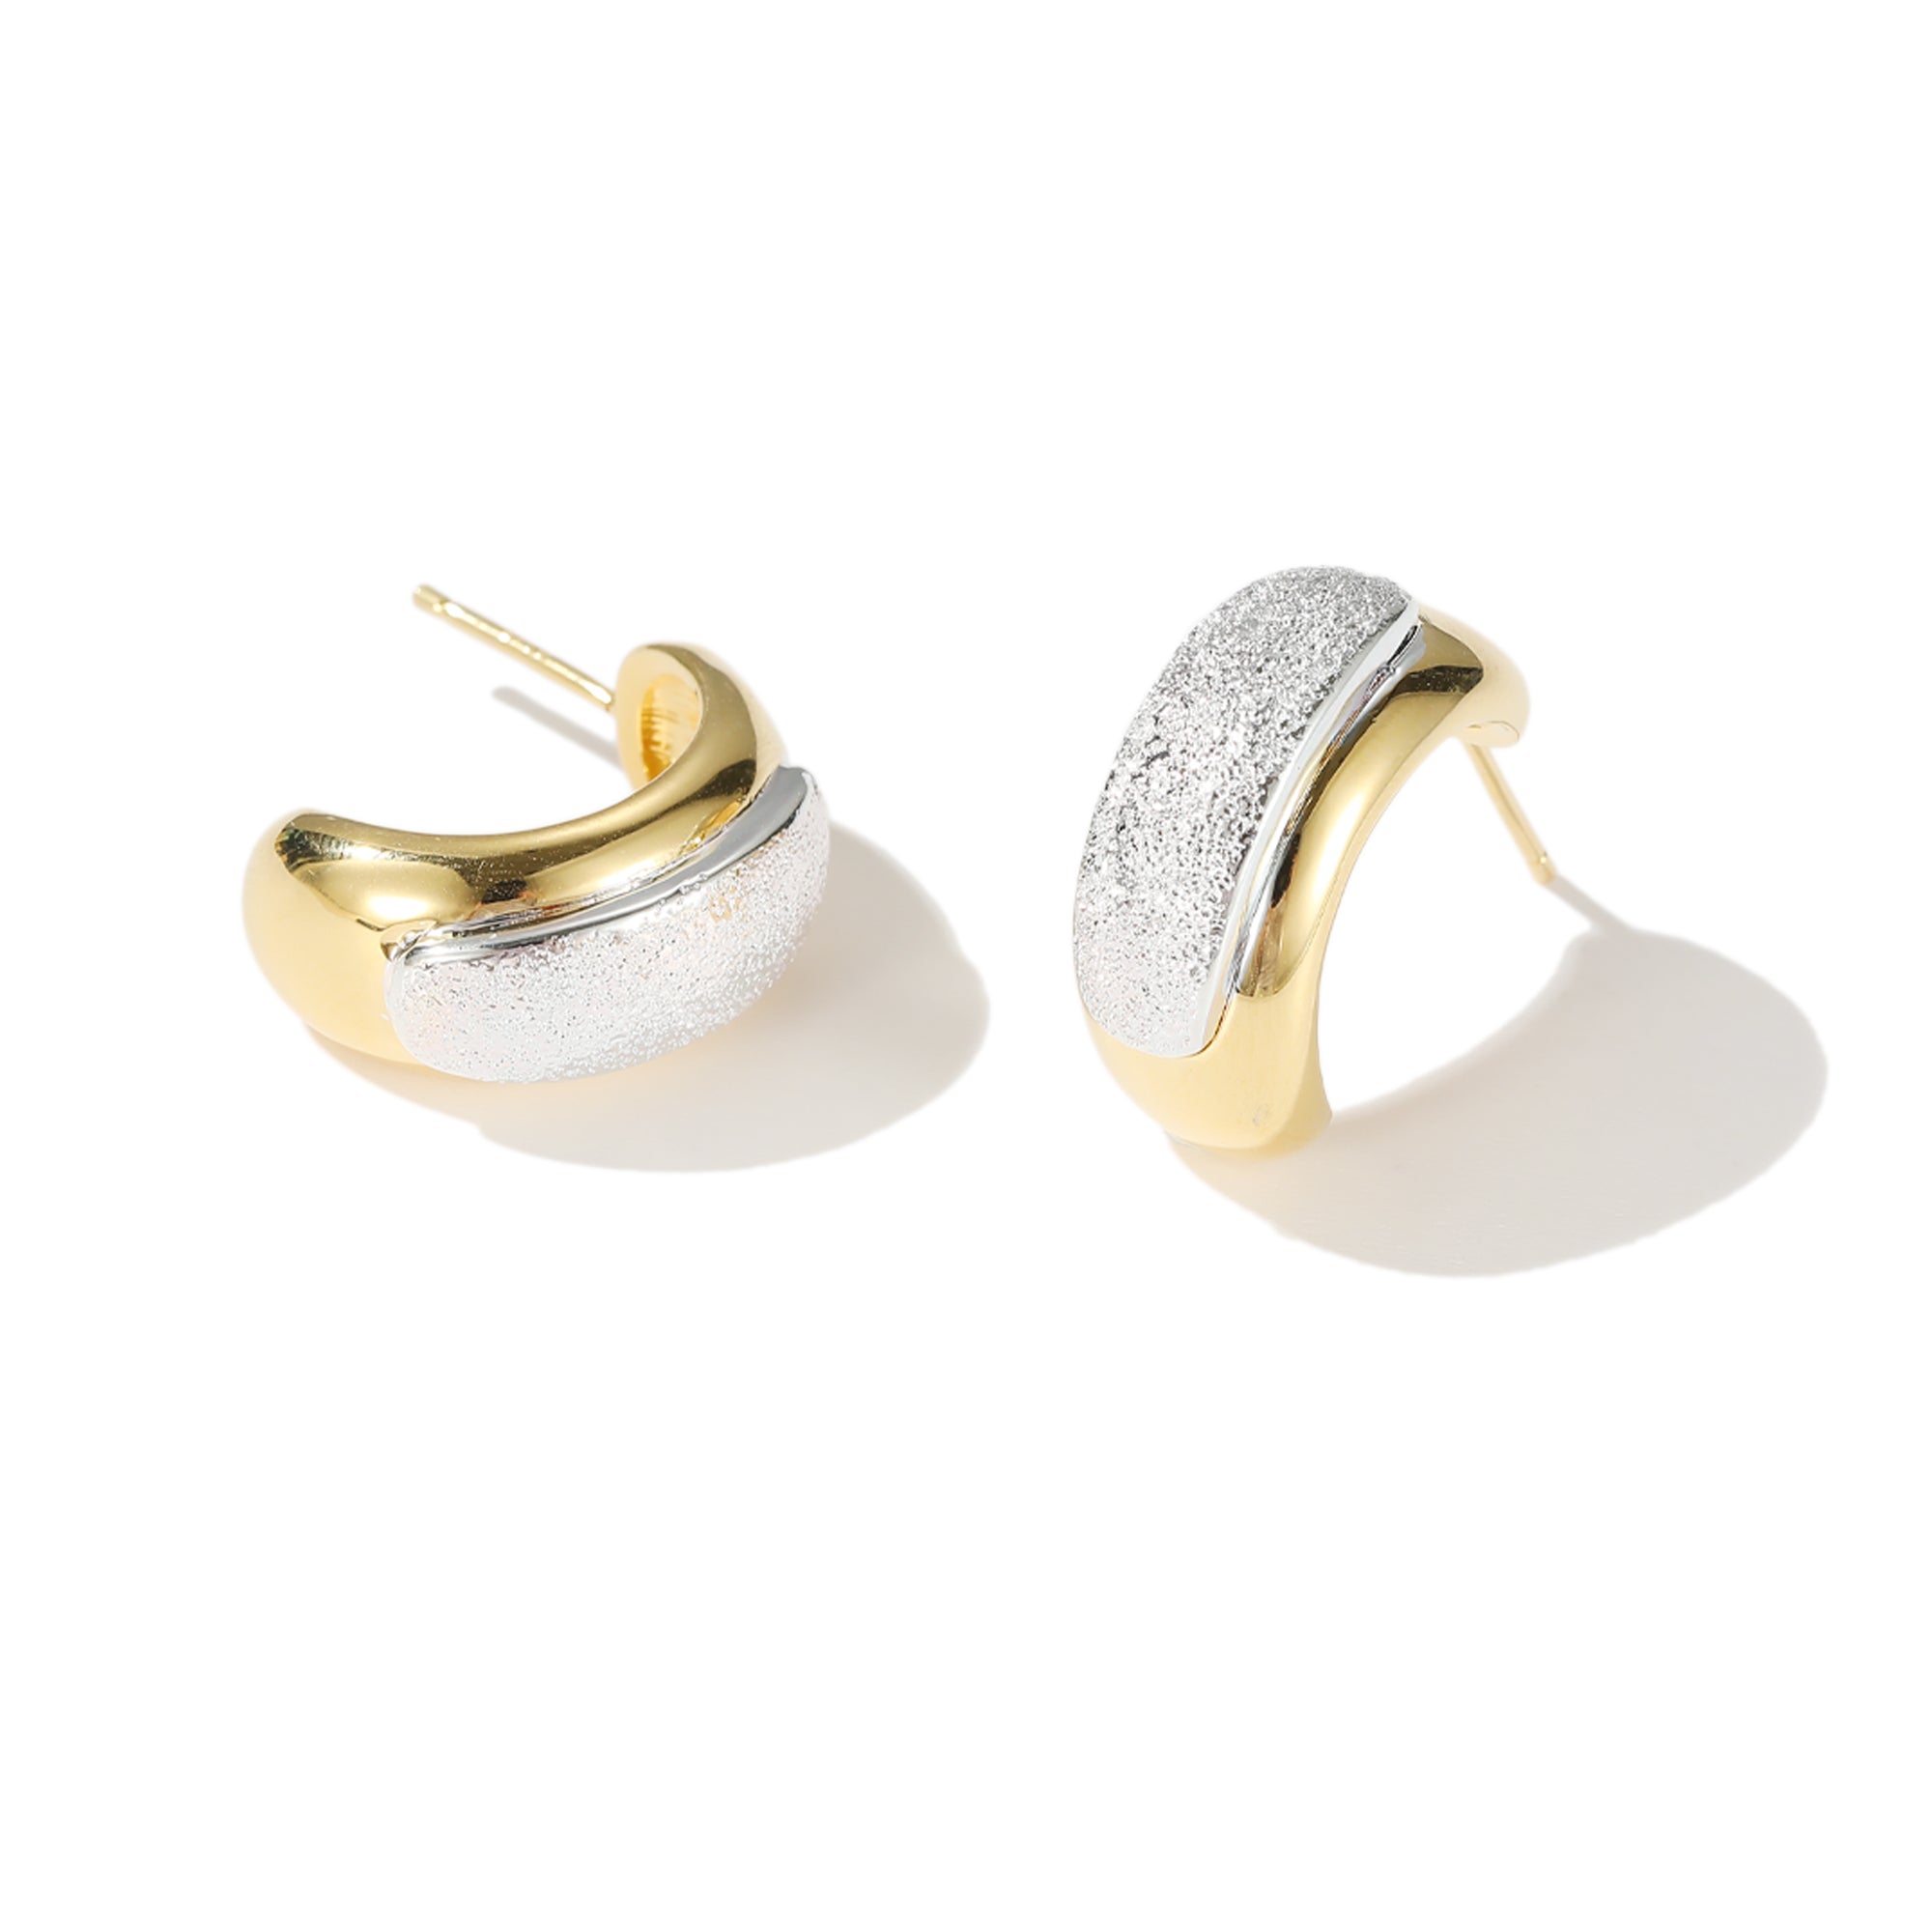 Frosted and Matted Texture Two Tone Hoop Earrings